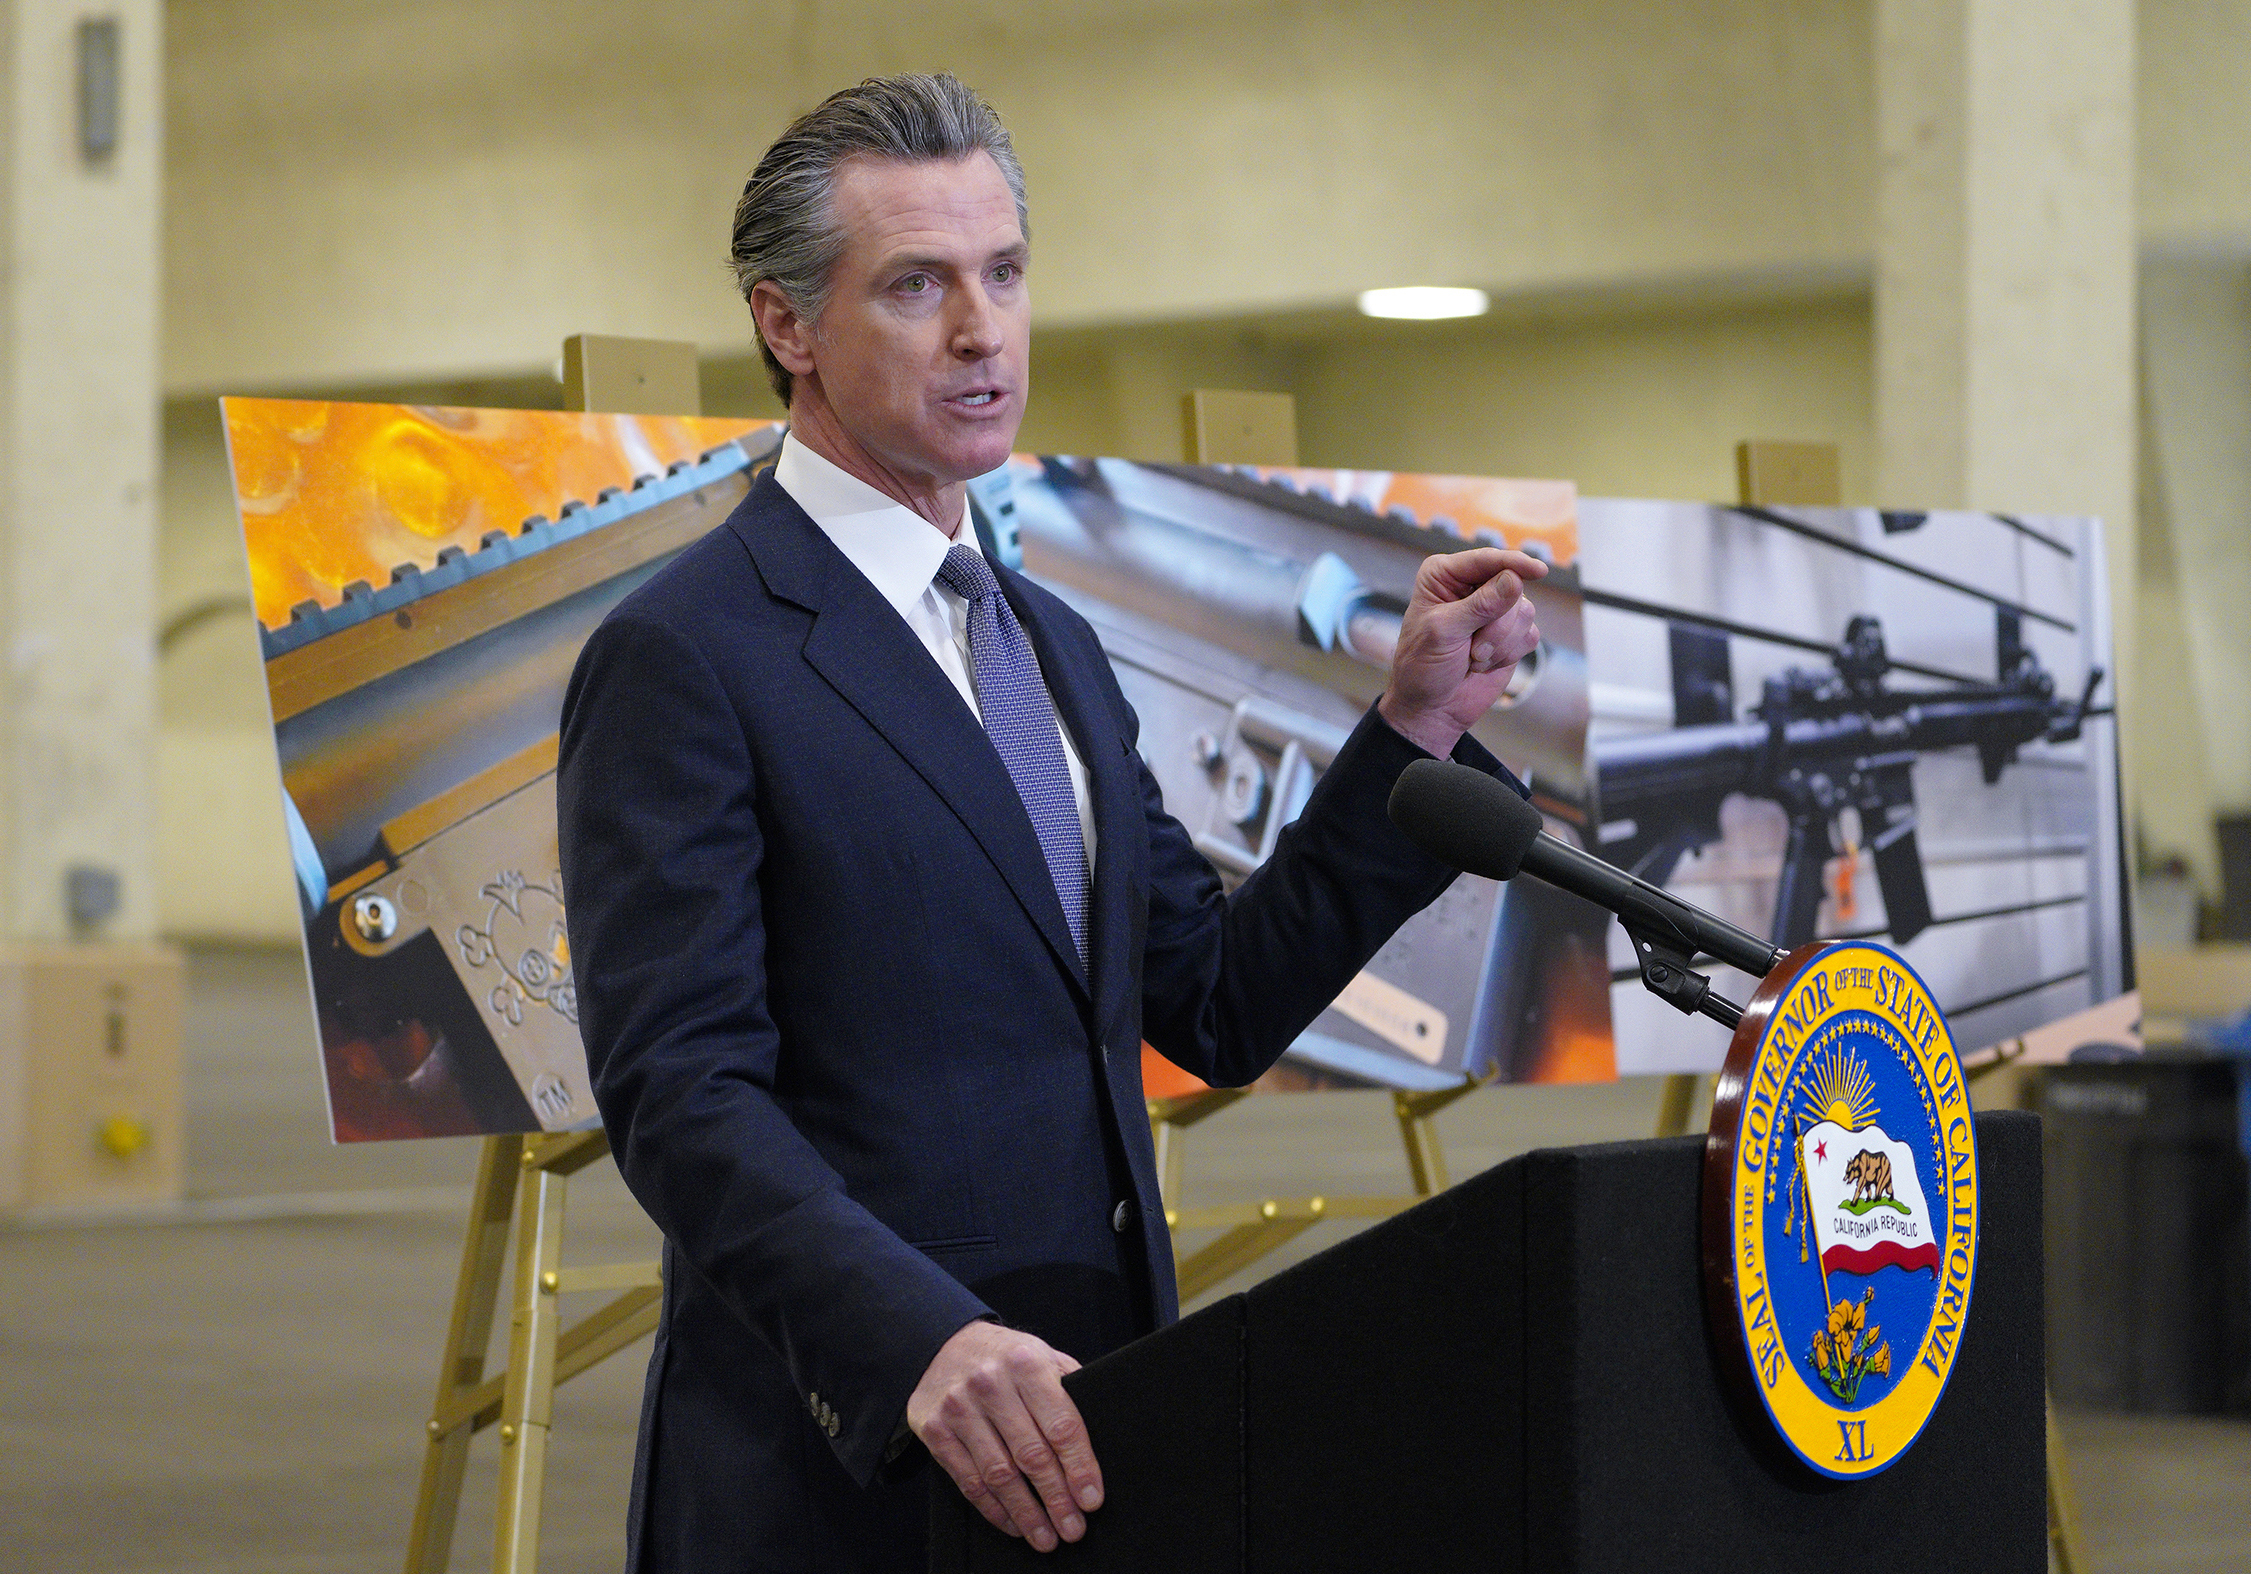 FILE - California Gov. Gavin Newsom speaks to reporters at Del Mar Fairgrounds on Feb. 18, 2022, in Del Mar, Calif. Newsom announced Friday, July 22, he will sign a controversial, first-in-the-nation gun control law patterned after a Texas anti-abortion law. (Nelvin C. Cepeda/The San Diego Union-Tribune via AP, File)